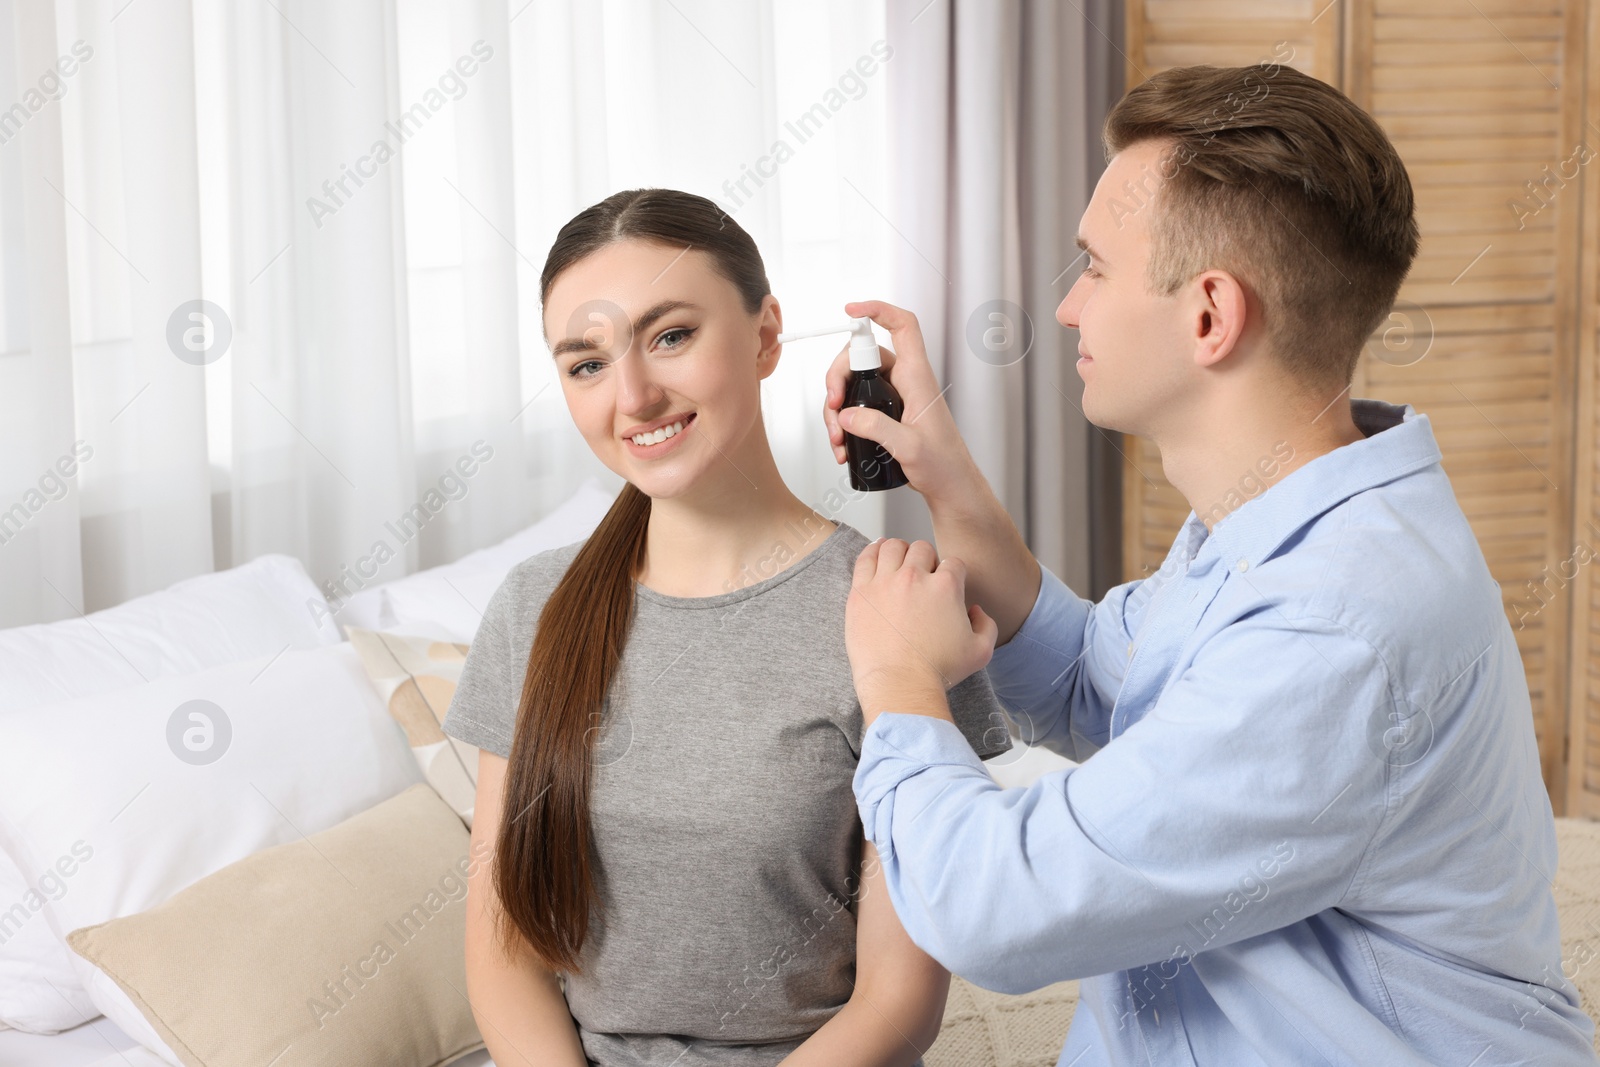 Photo of Man spraying medication into woman's ear at home